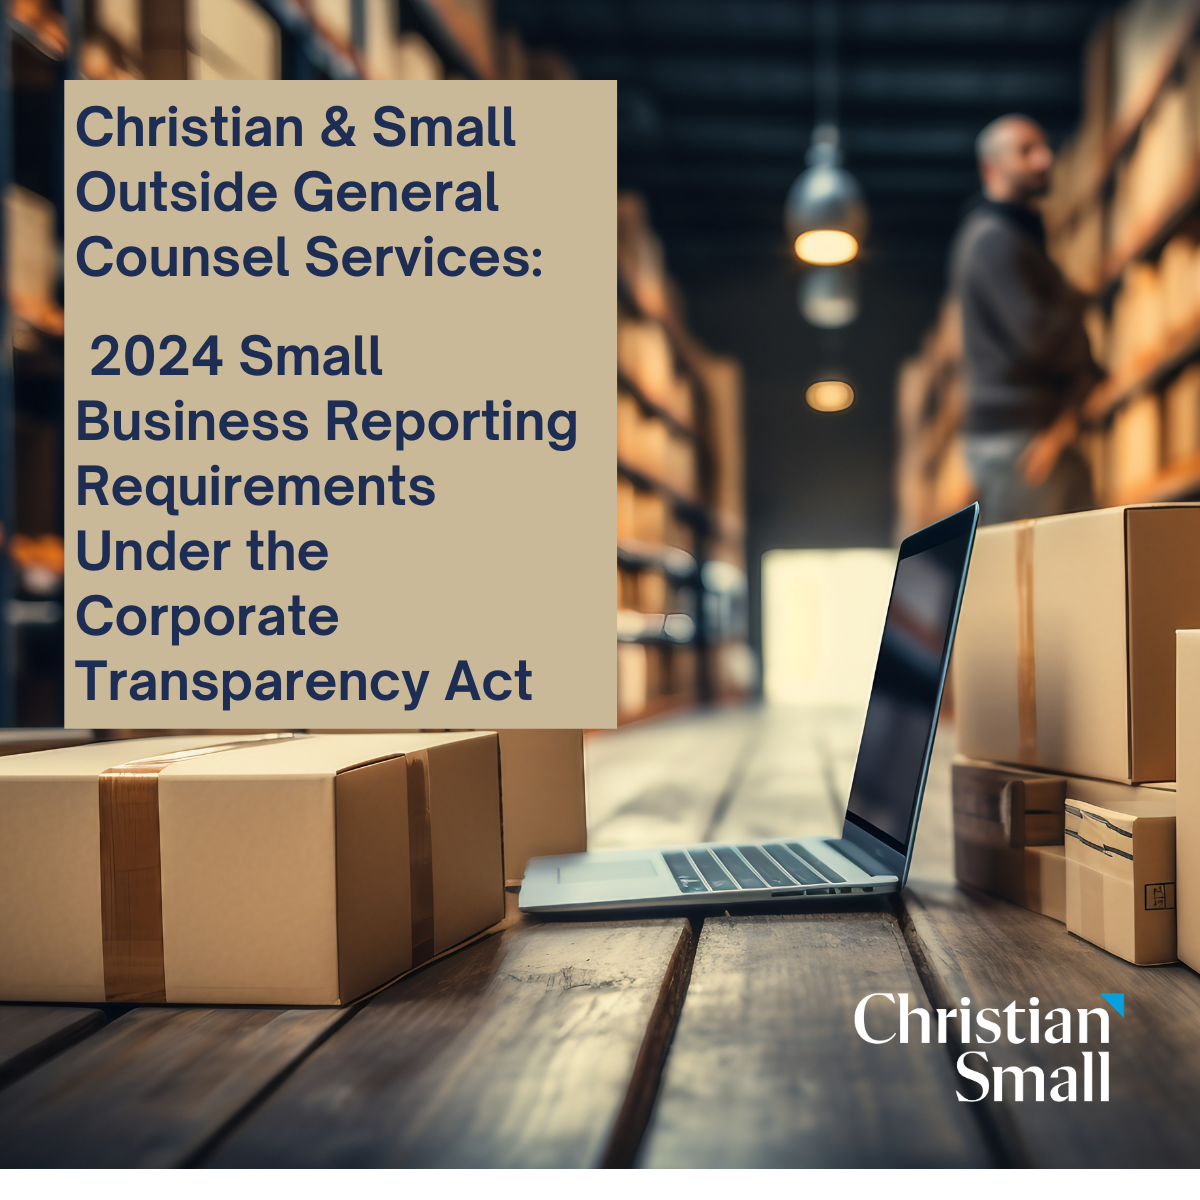 Christian & Small Outside General Counsel Services: 2024 Small Business Reporting Requirements Under the Corporate Transparency Act